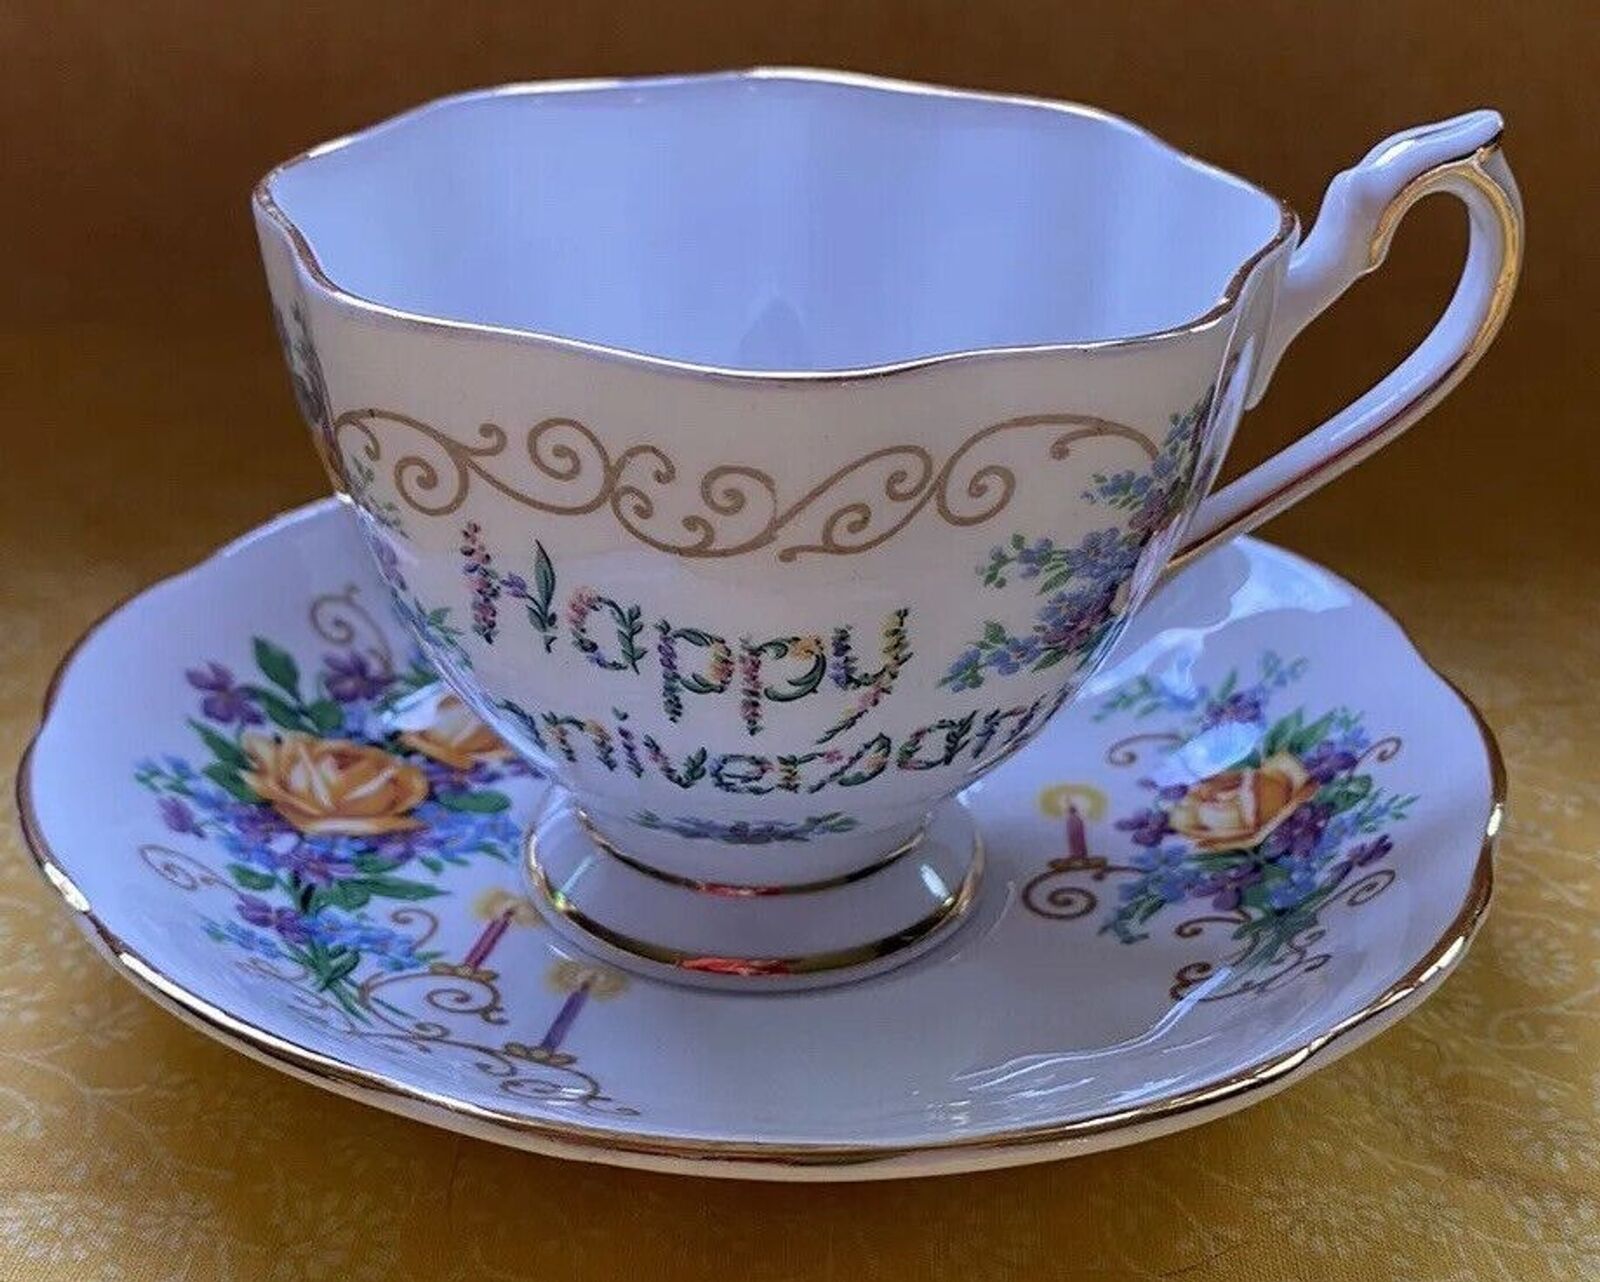 Princess Anne Bone China - Happy Anniversary teacup & saucer - Made In England